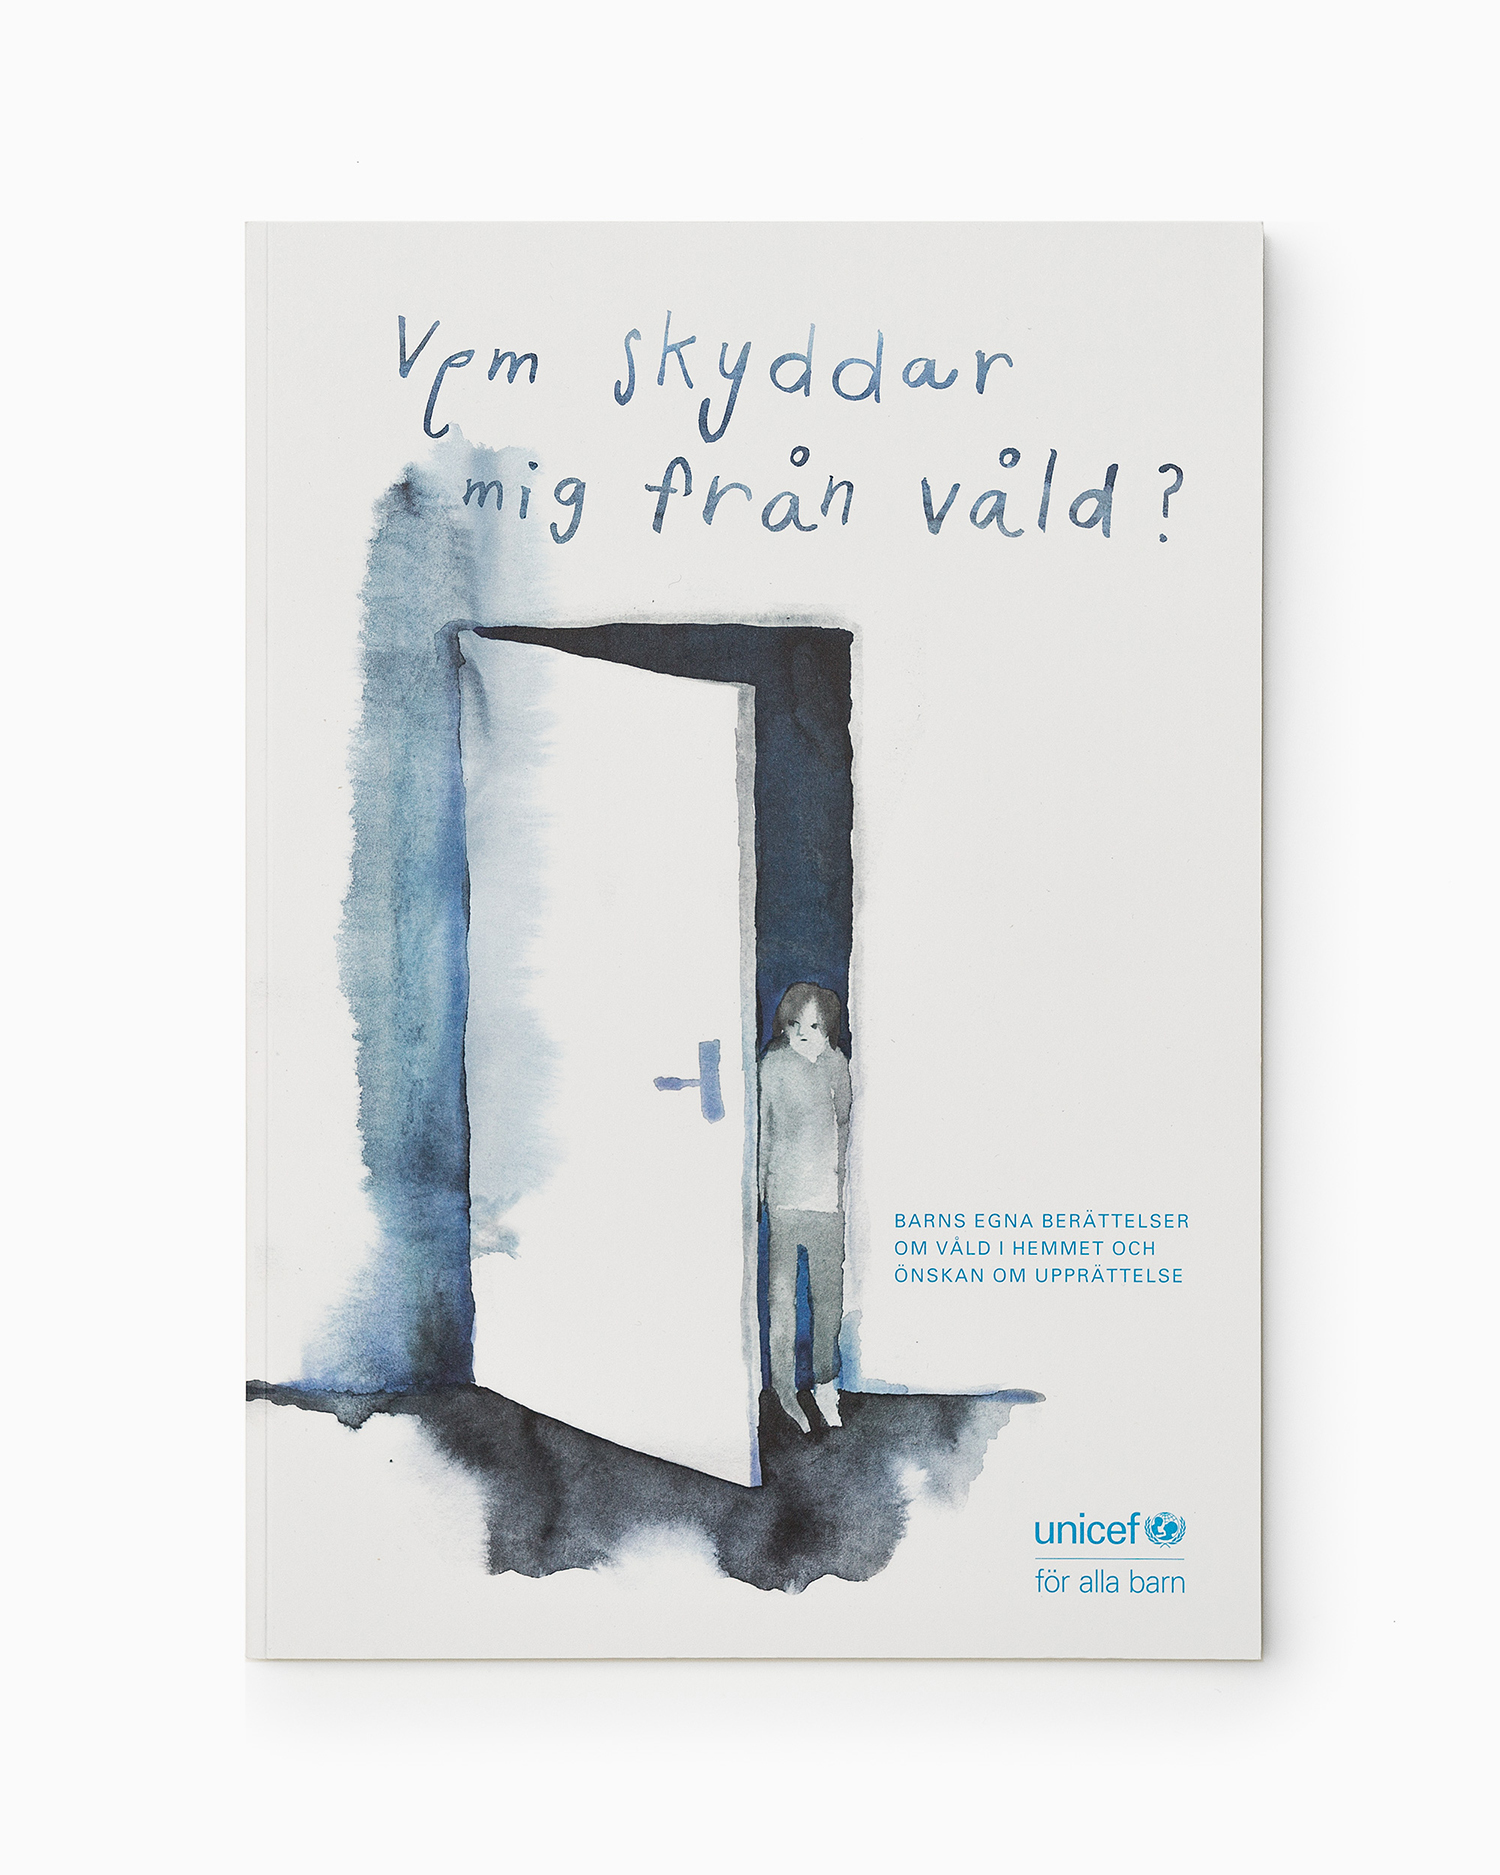 Who Protects Me from Violence? a UNICEF publication on domestic violence against children in Sweden designed by Bedow